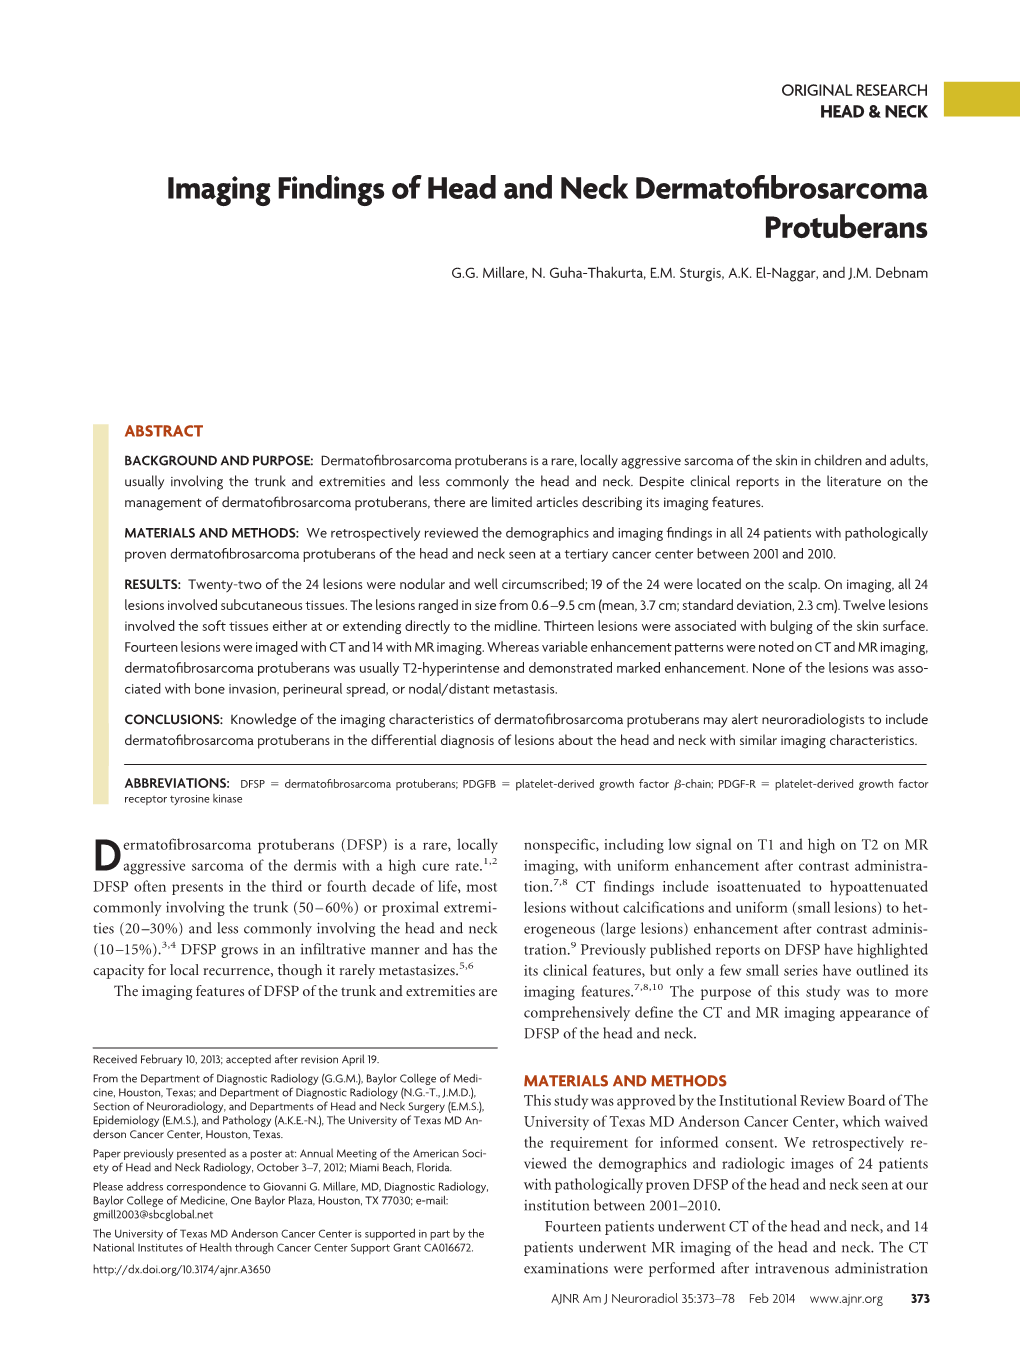 Imaging Findings of Head and Neck Dermatofibrosarcoma Protuberans